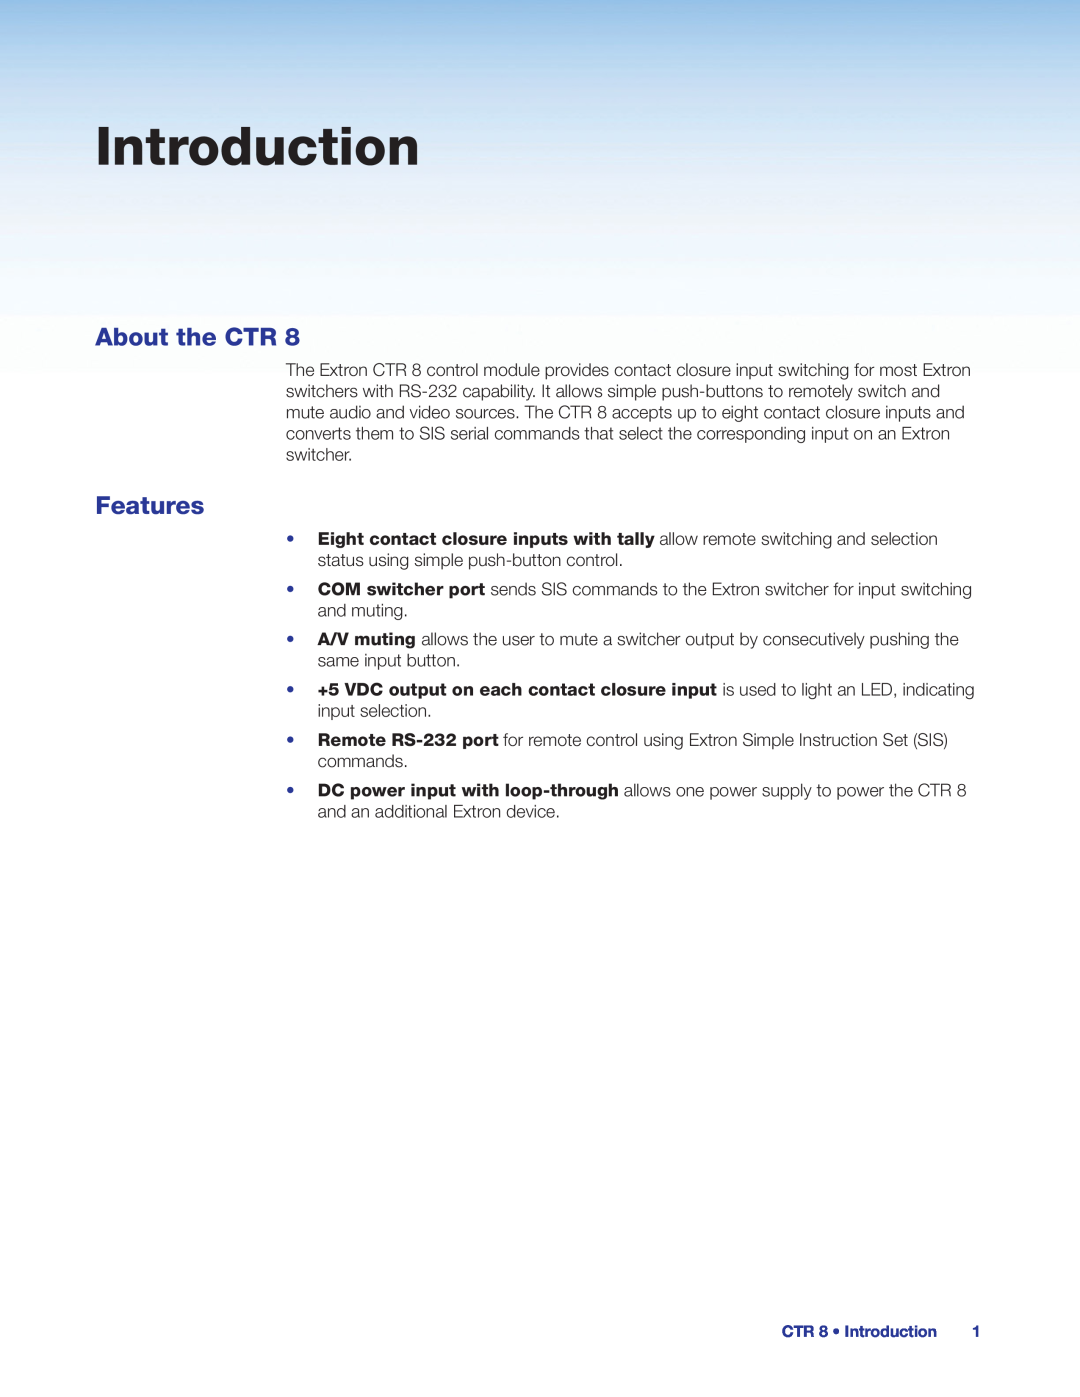 Extron electronic CTR 8 manual Introduction, About the CTR, Features 